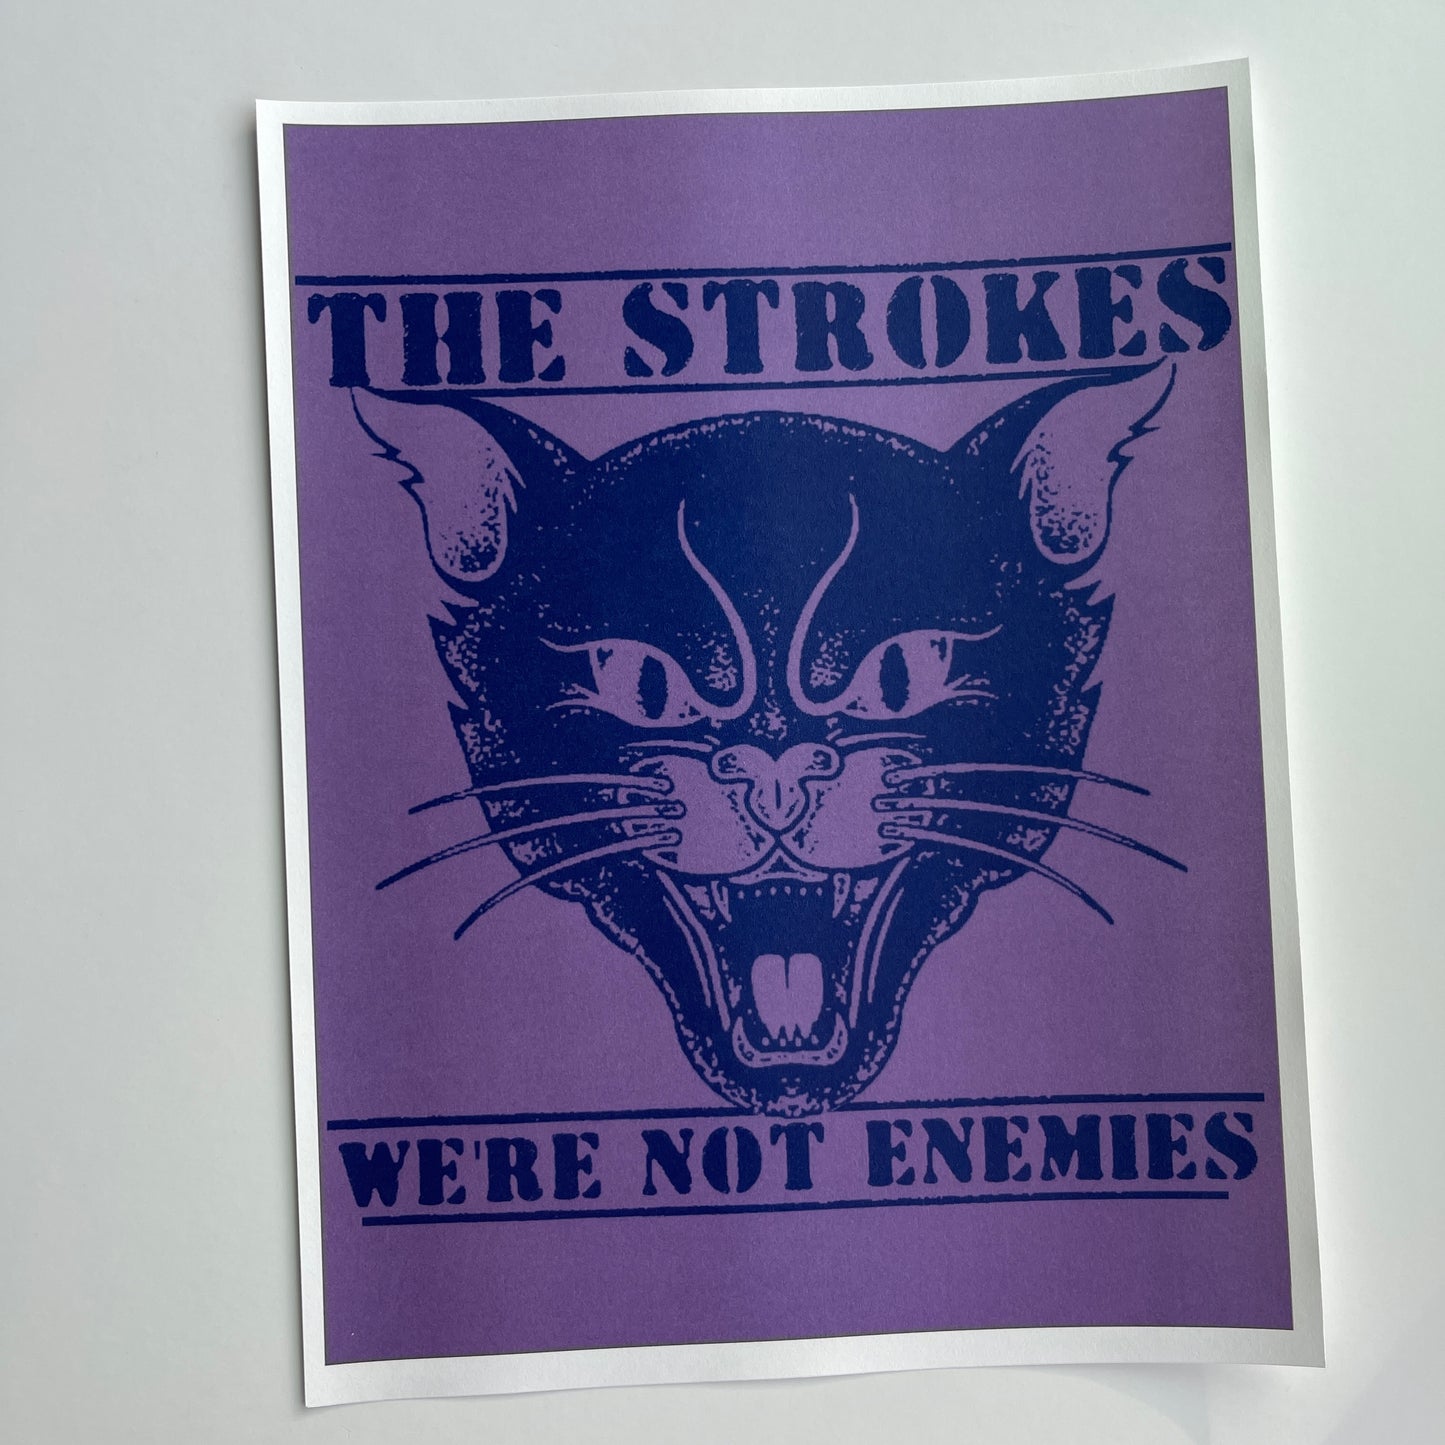 The strokes poster